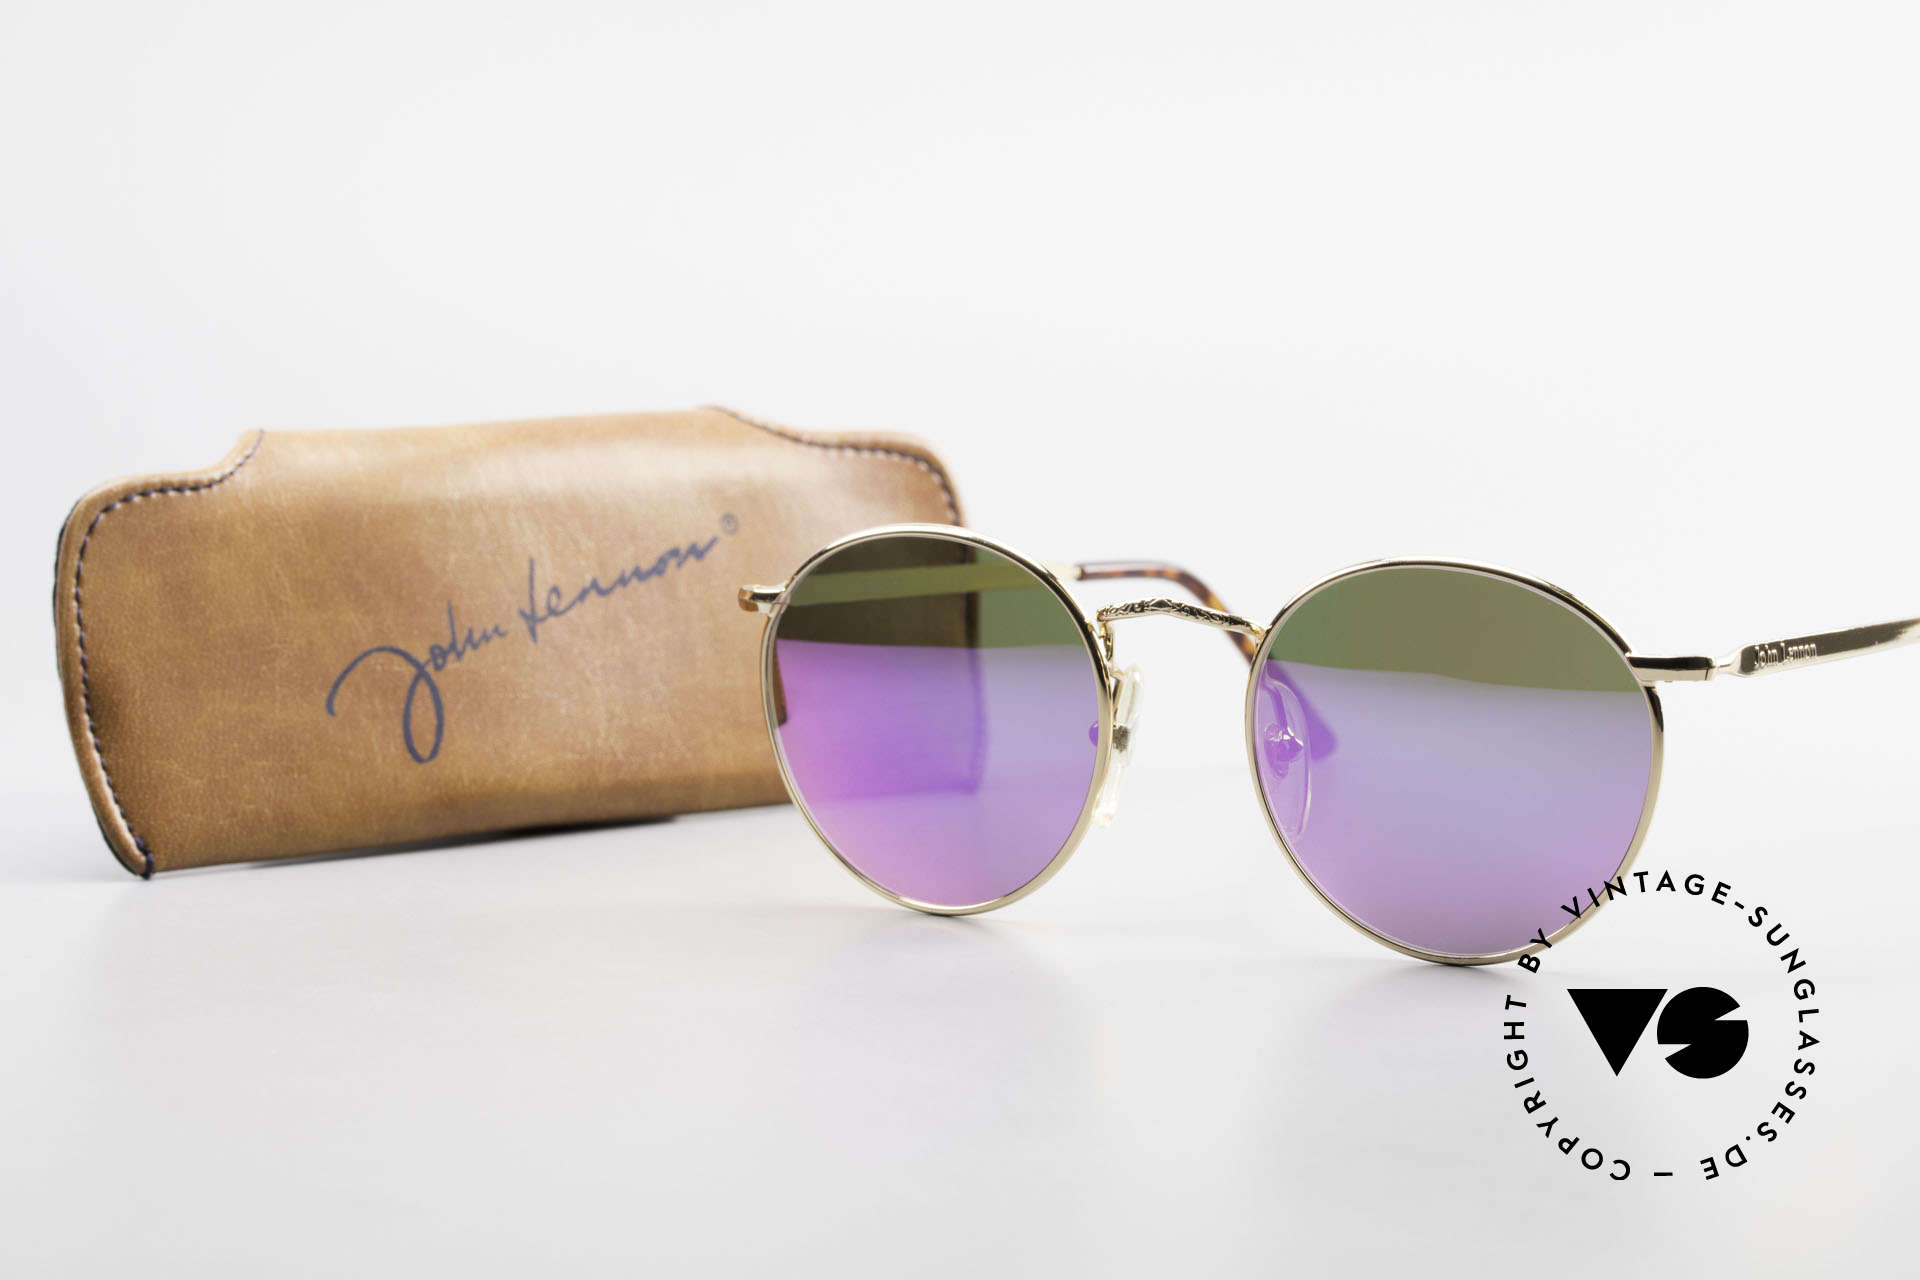 John Lennon - Imagine With Pink Mirrored Sun Lenses, Size: small, Made for Men and Women